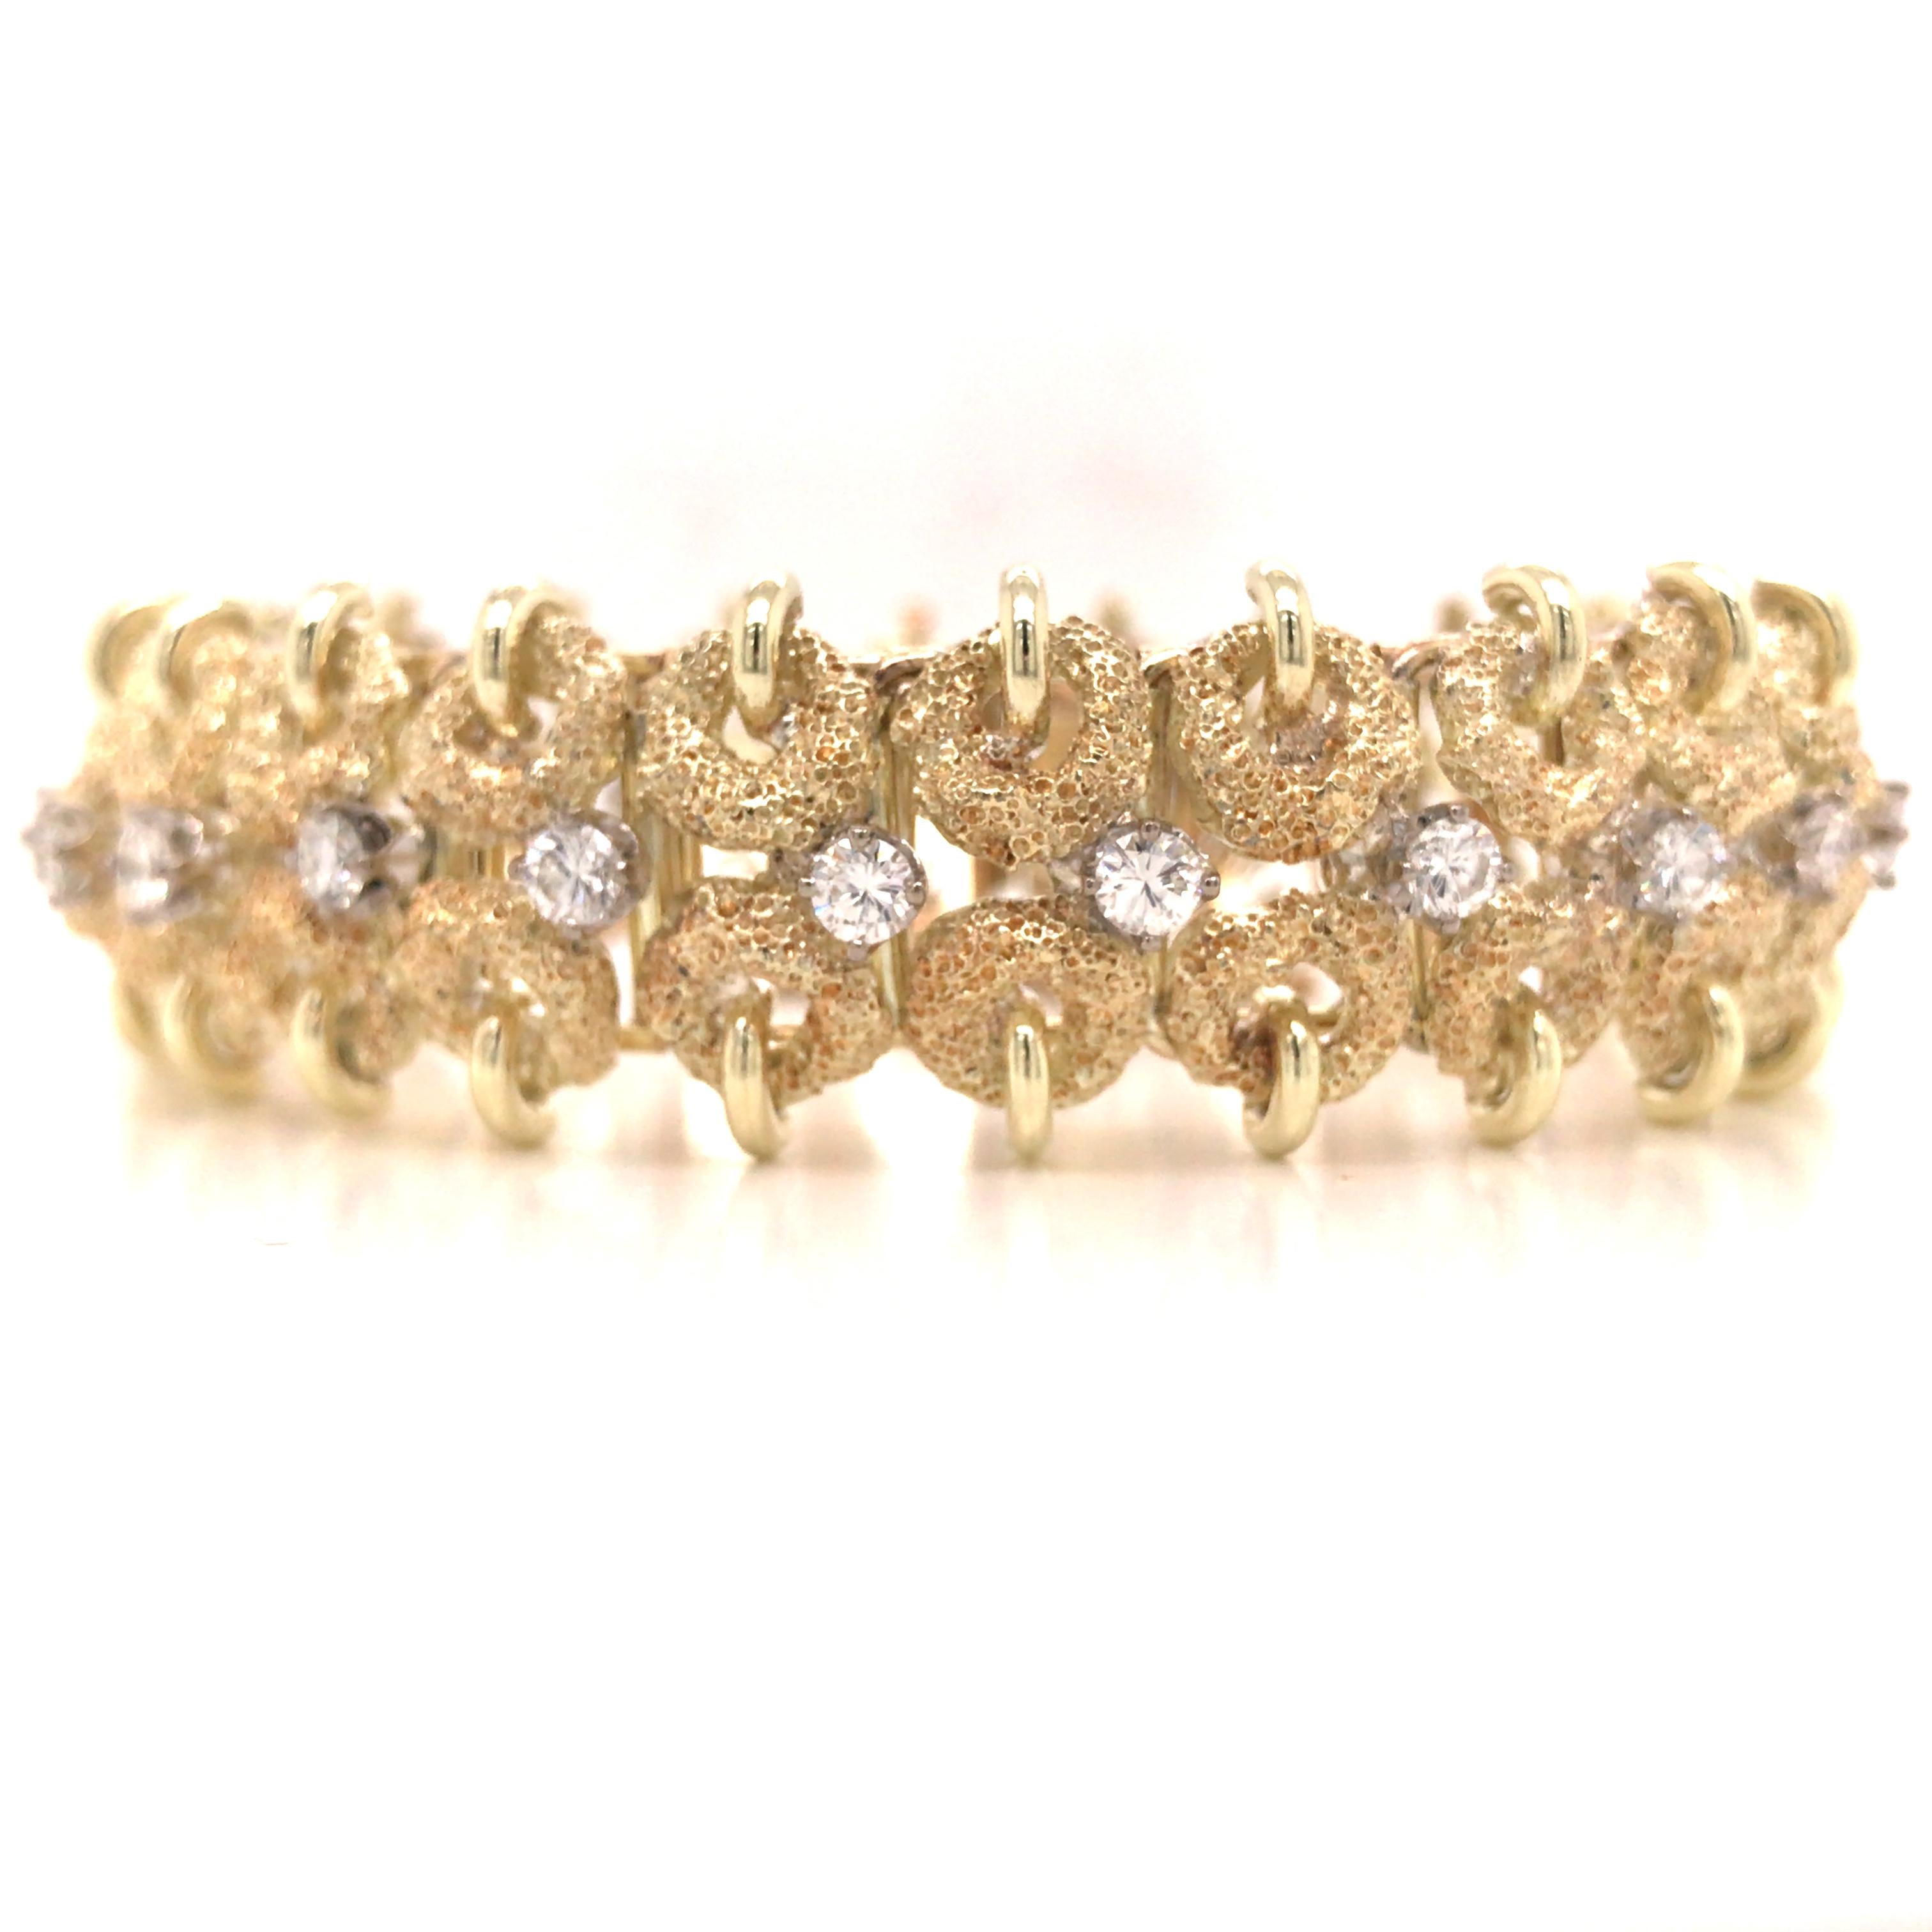 Diamond Circle Link Bracelet in 14K Yellow Gold.  Round Brilliant Cut Diamonds weighing 3.30ctw G-H in color and VS-SI in clarity are expertly set.  The Bracelet measures 6 1/2 inch in length and 3/4 inch in width. Stamped 